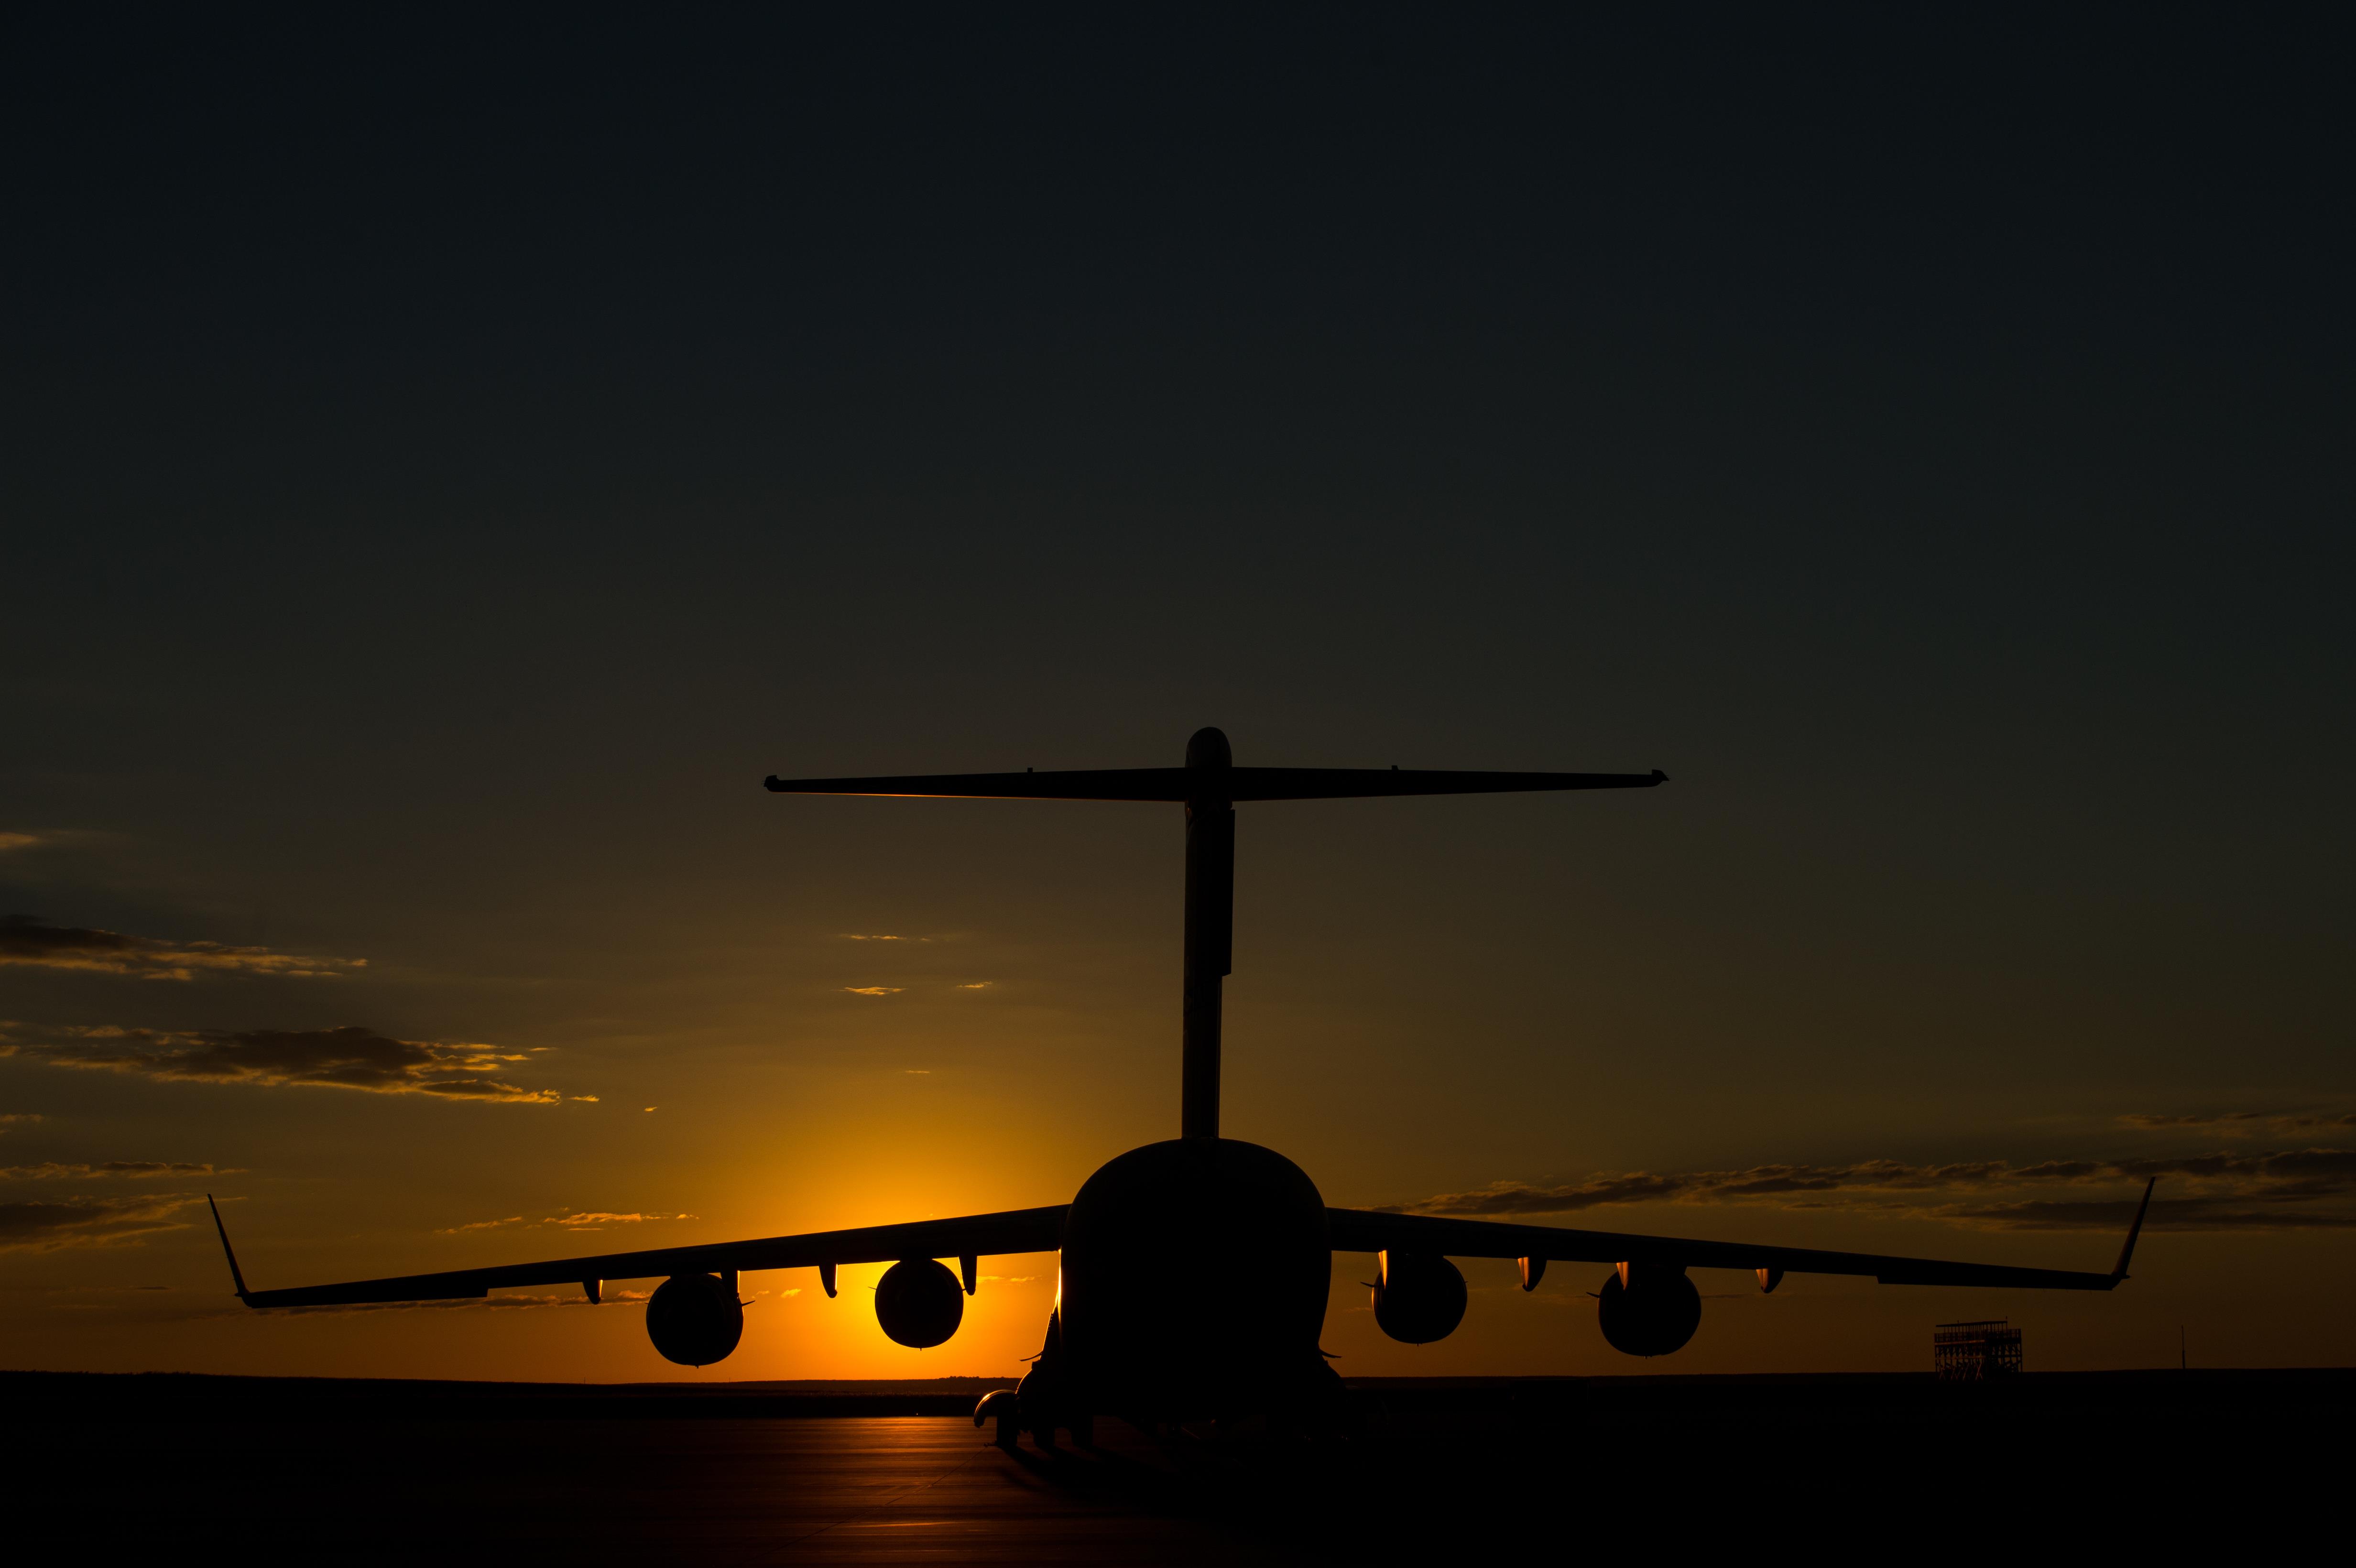 Boeing C 17 Globemaster Iii Aircraft Military Sunset Silhouette Cargo Aircraft Air Force Transport A 4928x3280